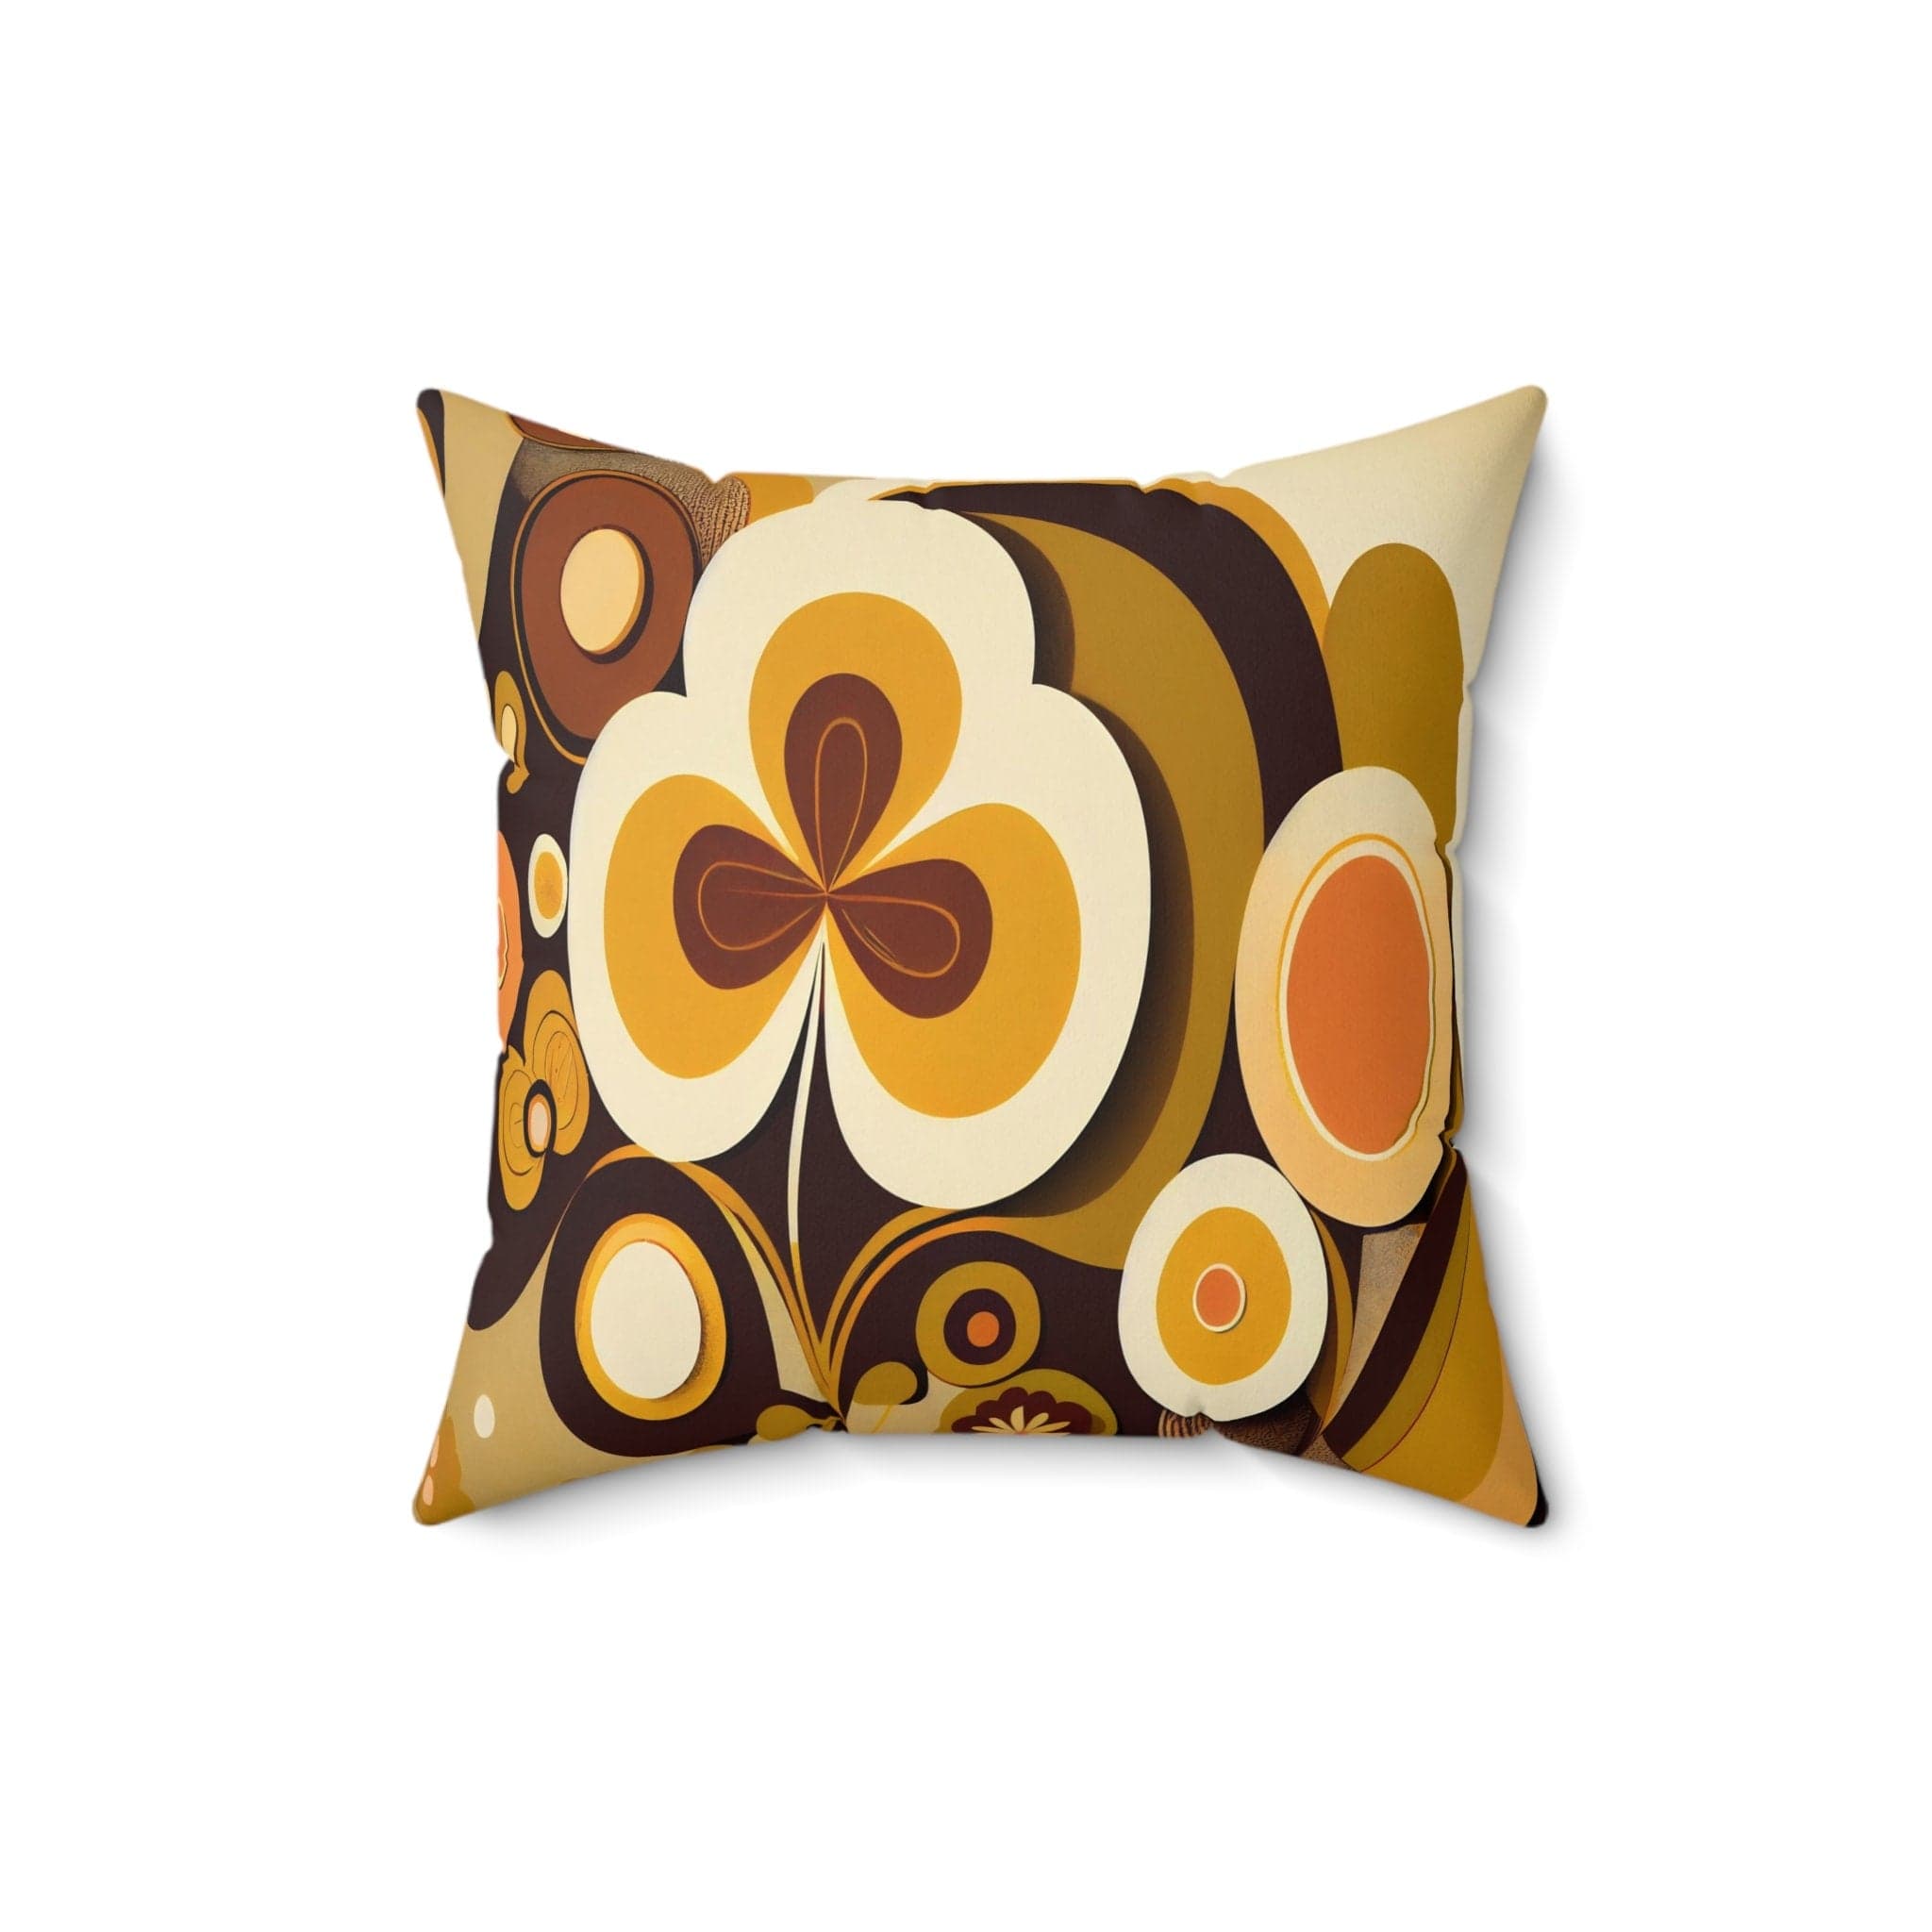 Kate McEnroe New York 60s Mid Mod Geometric Retro Floral Throw Pillow with Insert, MCM 70s Groovy, Hippie Bold Abstract Living Room, Bedroom Decor - 122981223Throw Pillows78732734622005225360